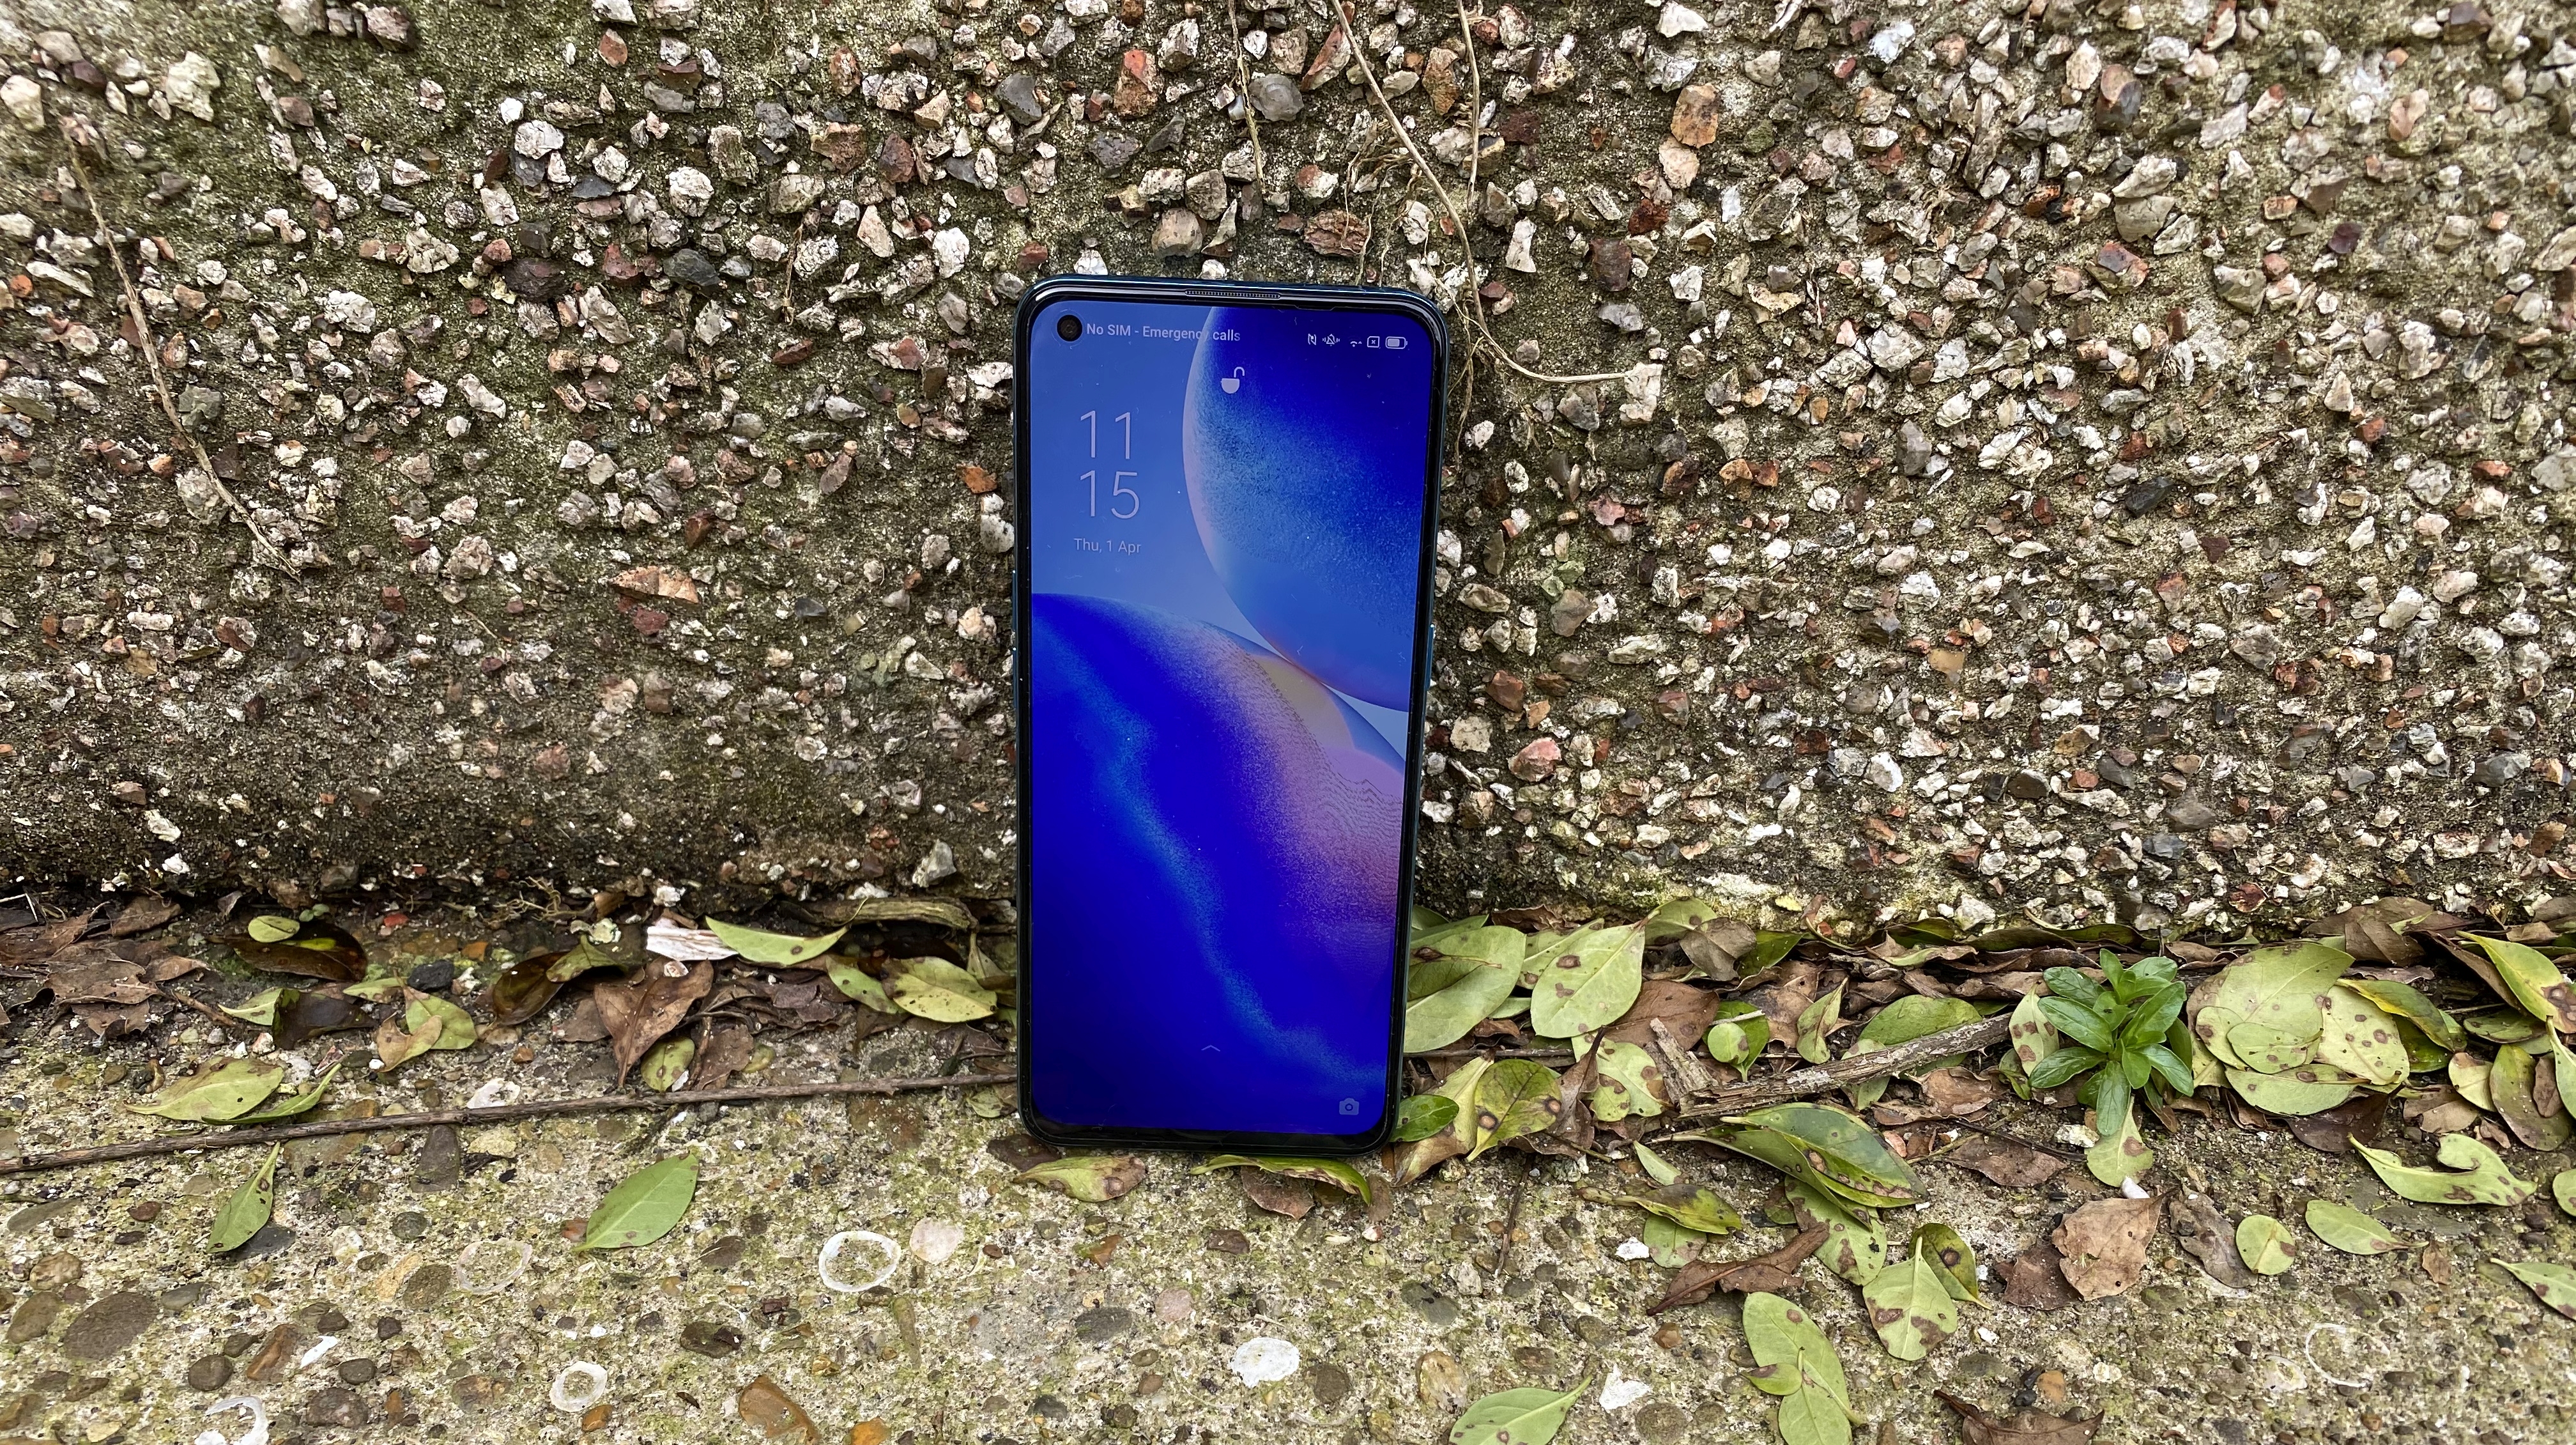 Oppo Find X3 Neo - Price, deal offers and Full Specs